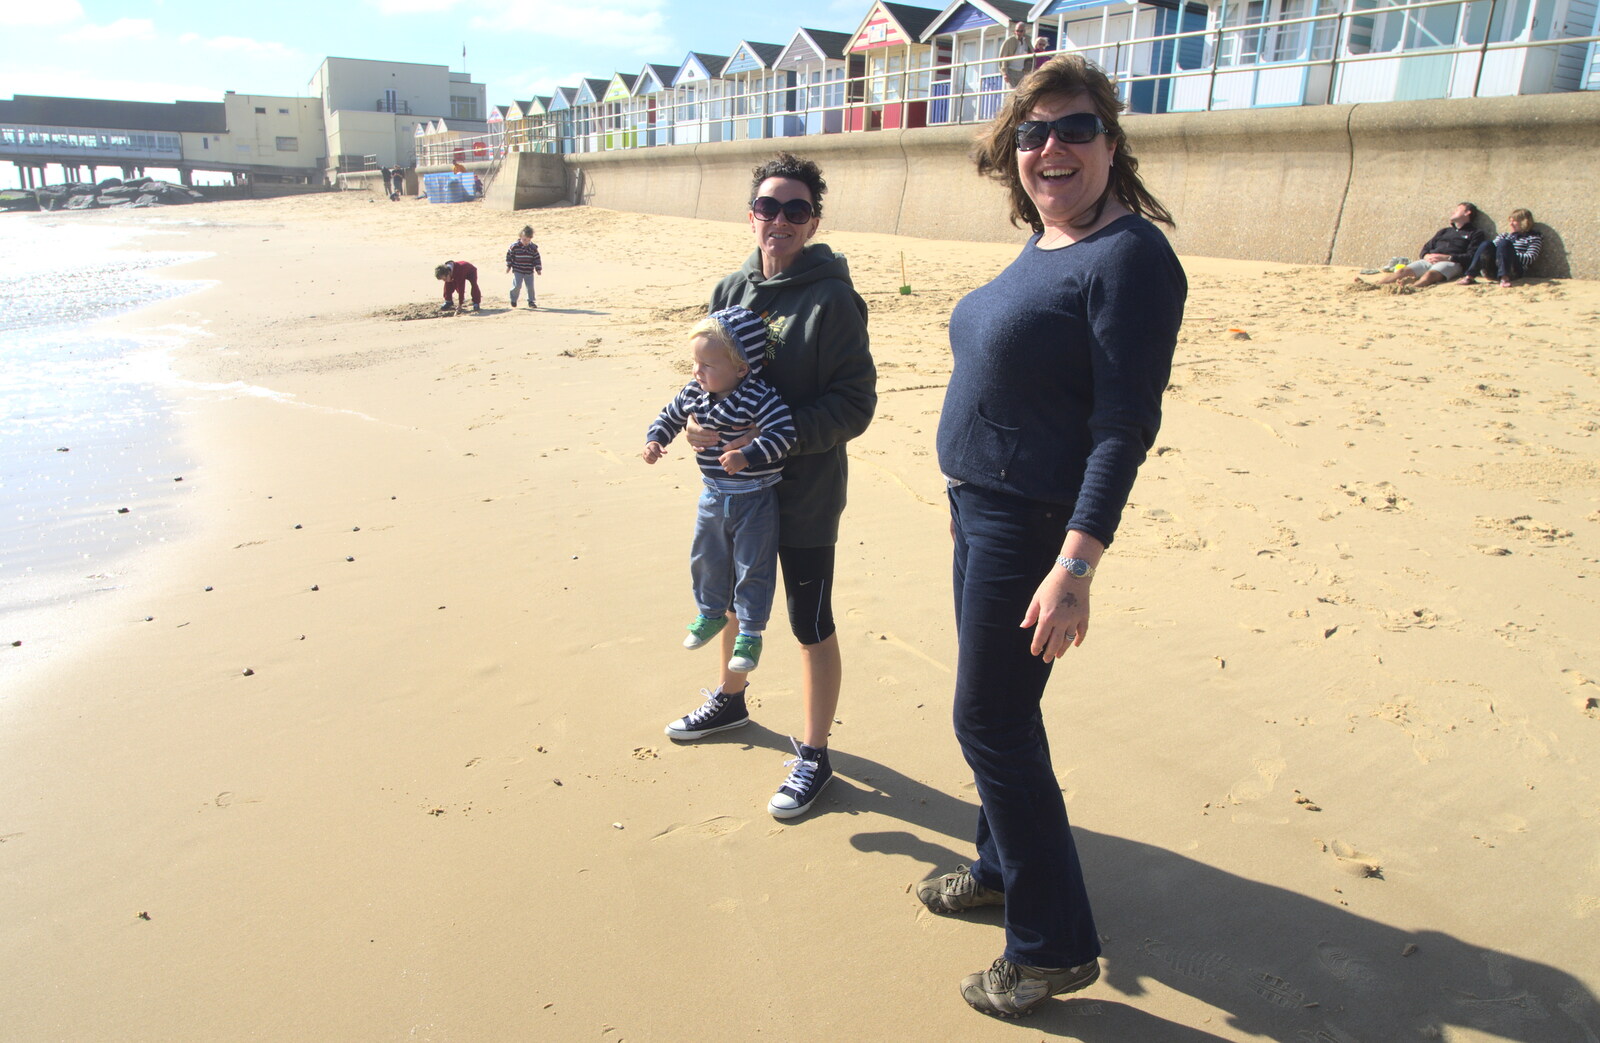 Harry, Evelyn and Sis on the beach from Southwold By The Sea, Suffolk - 29th September 2013